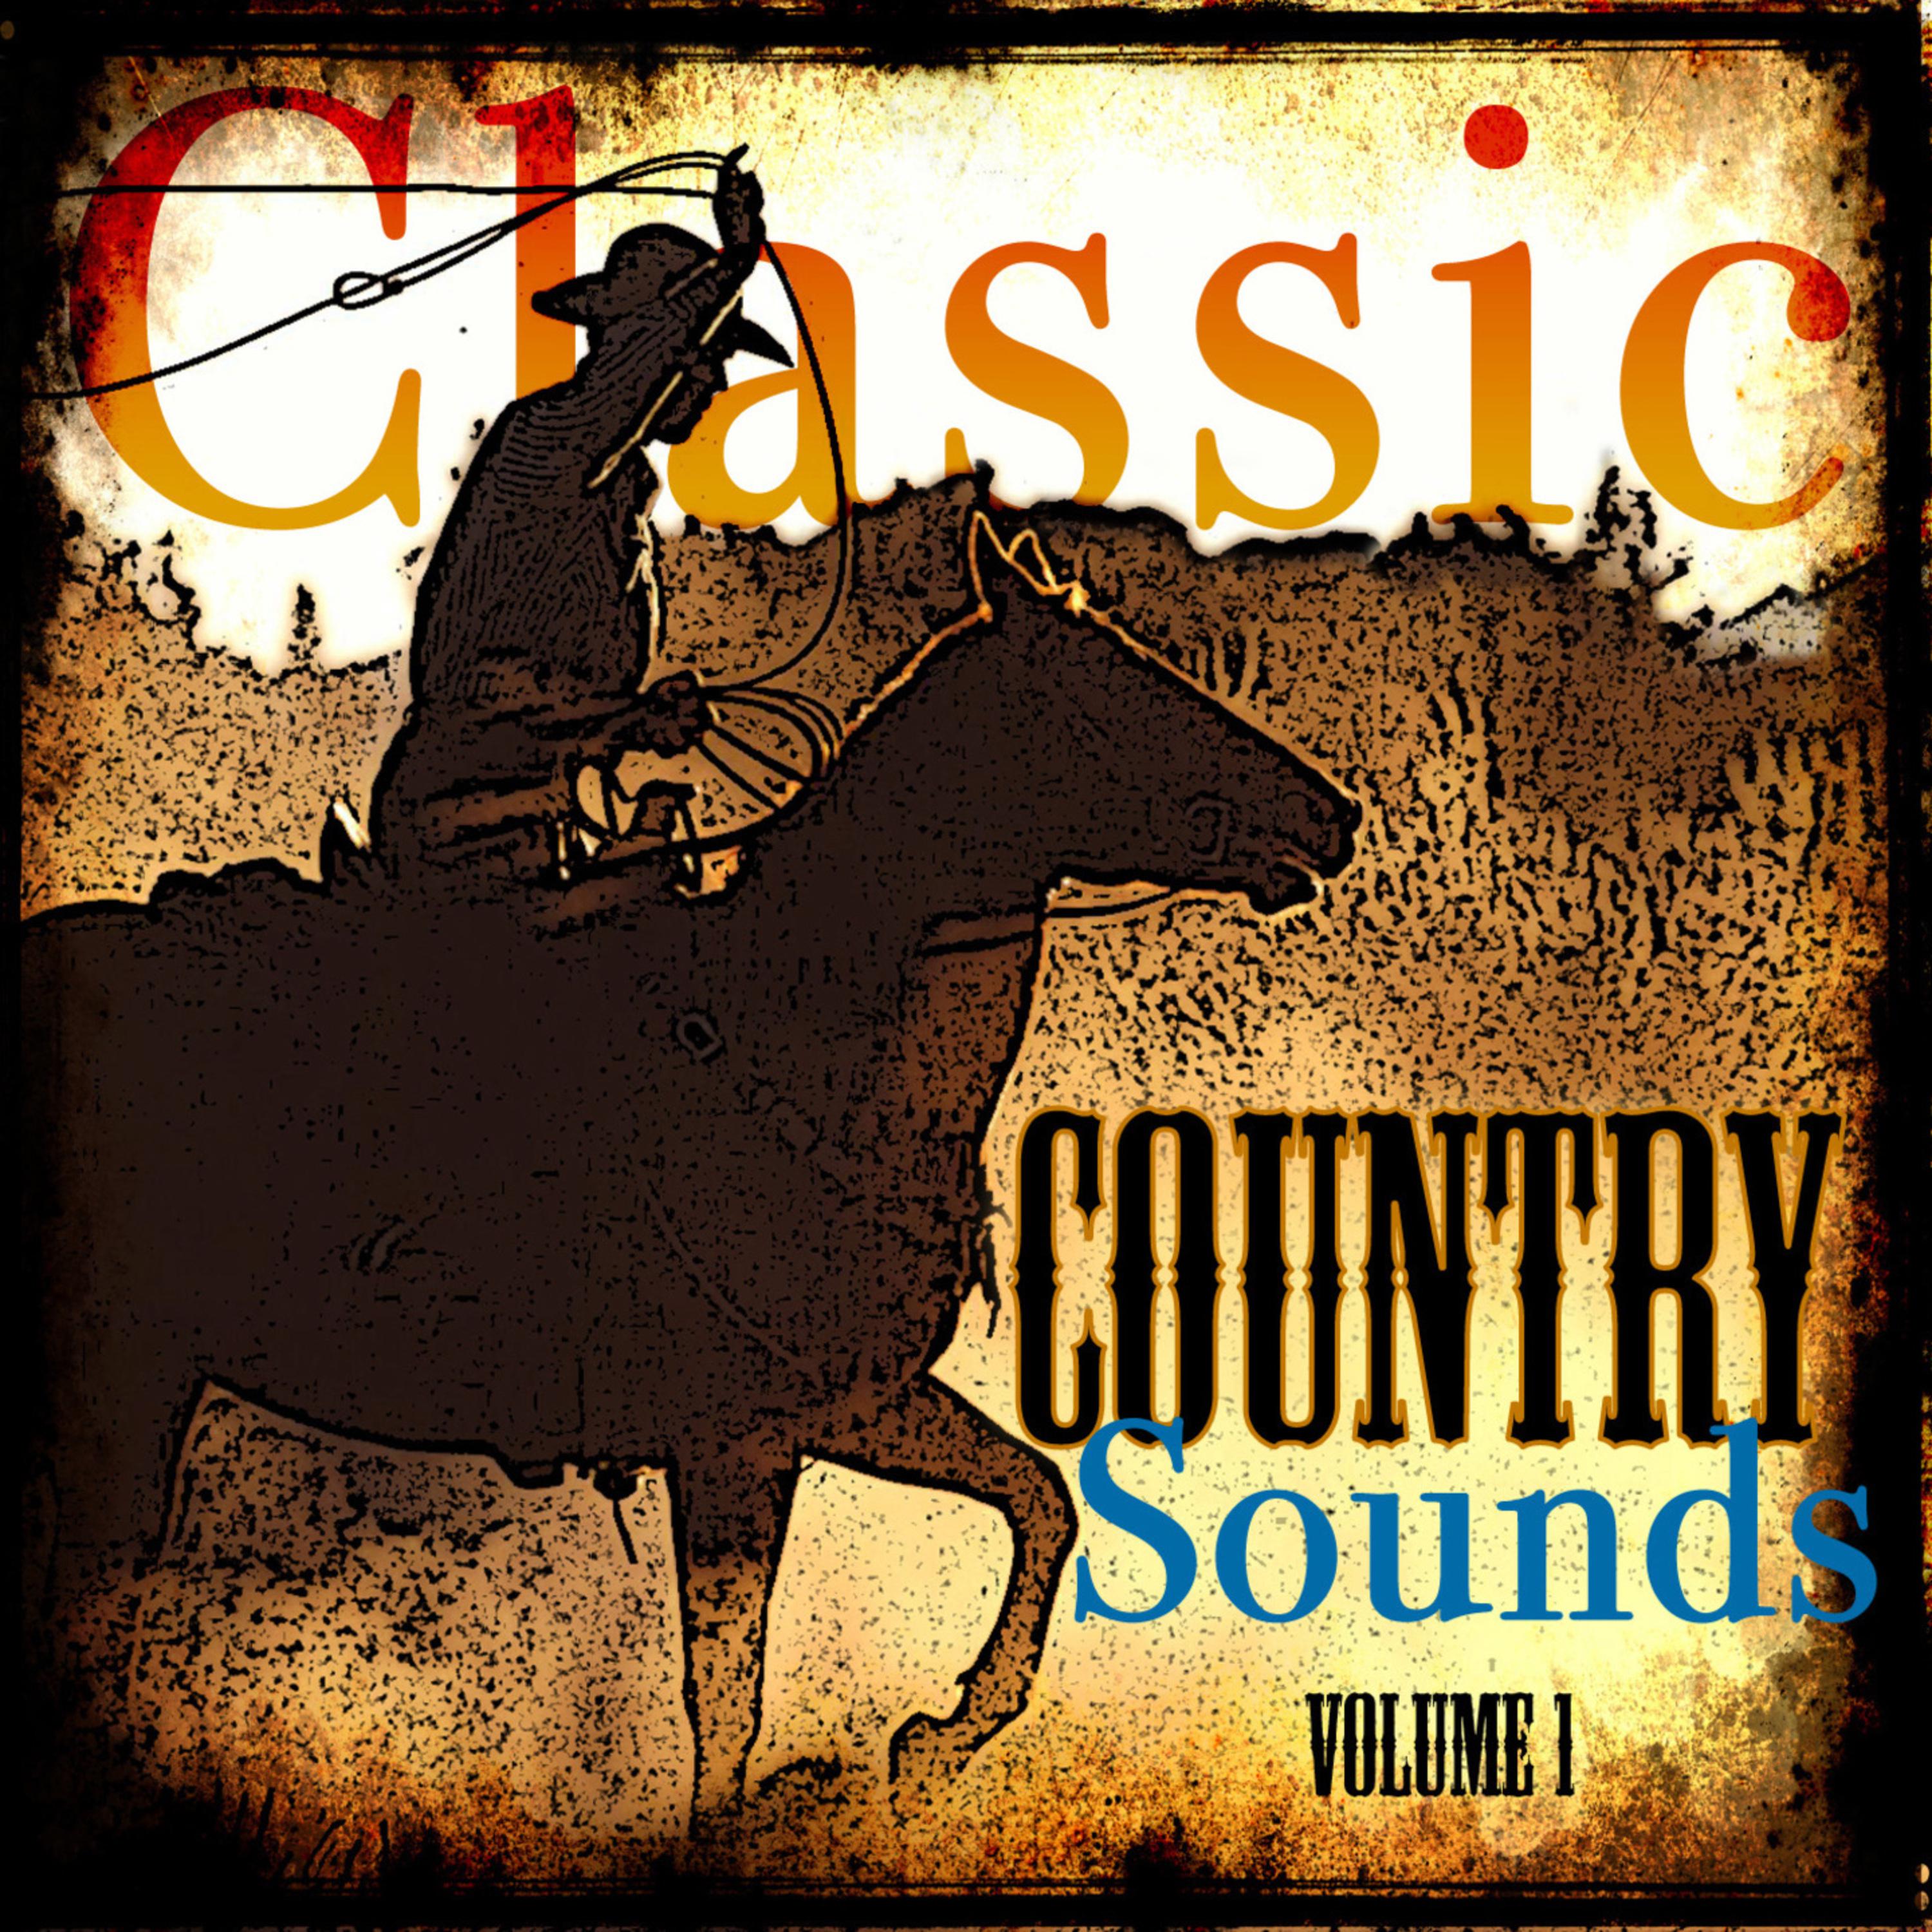 Classic Country Sounds Volume 1